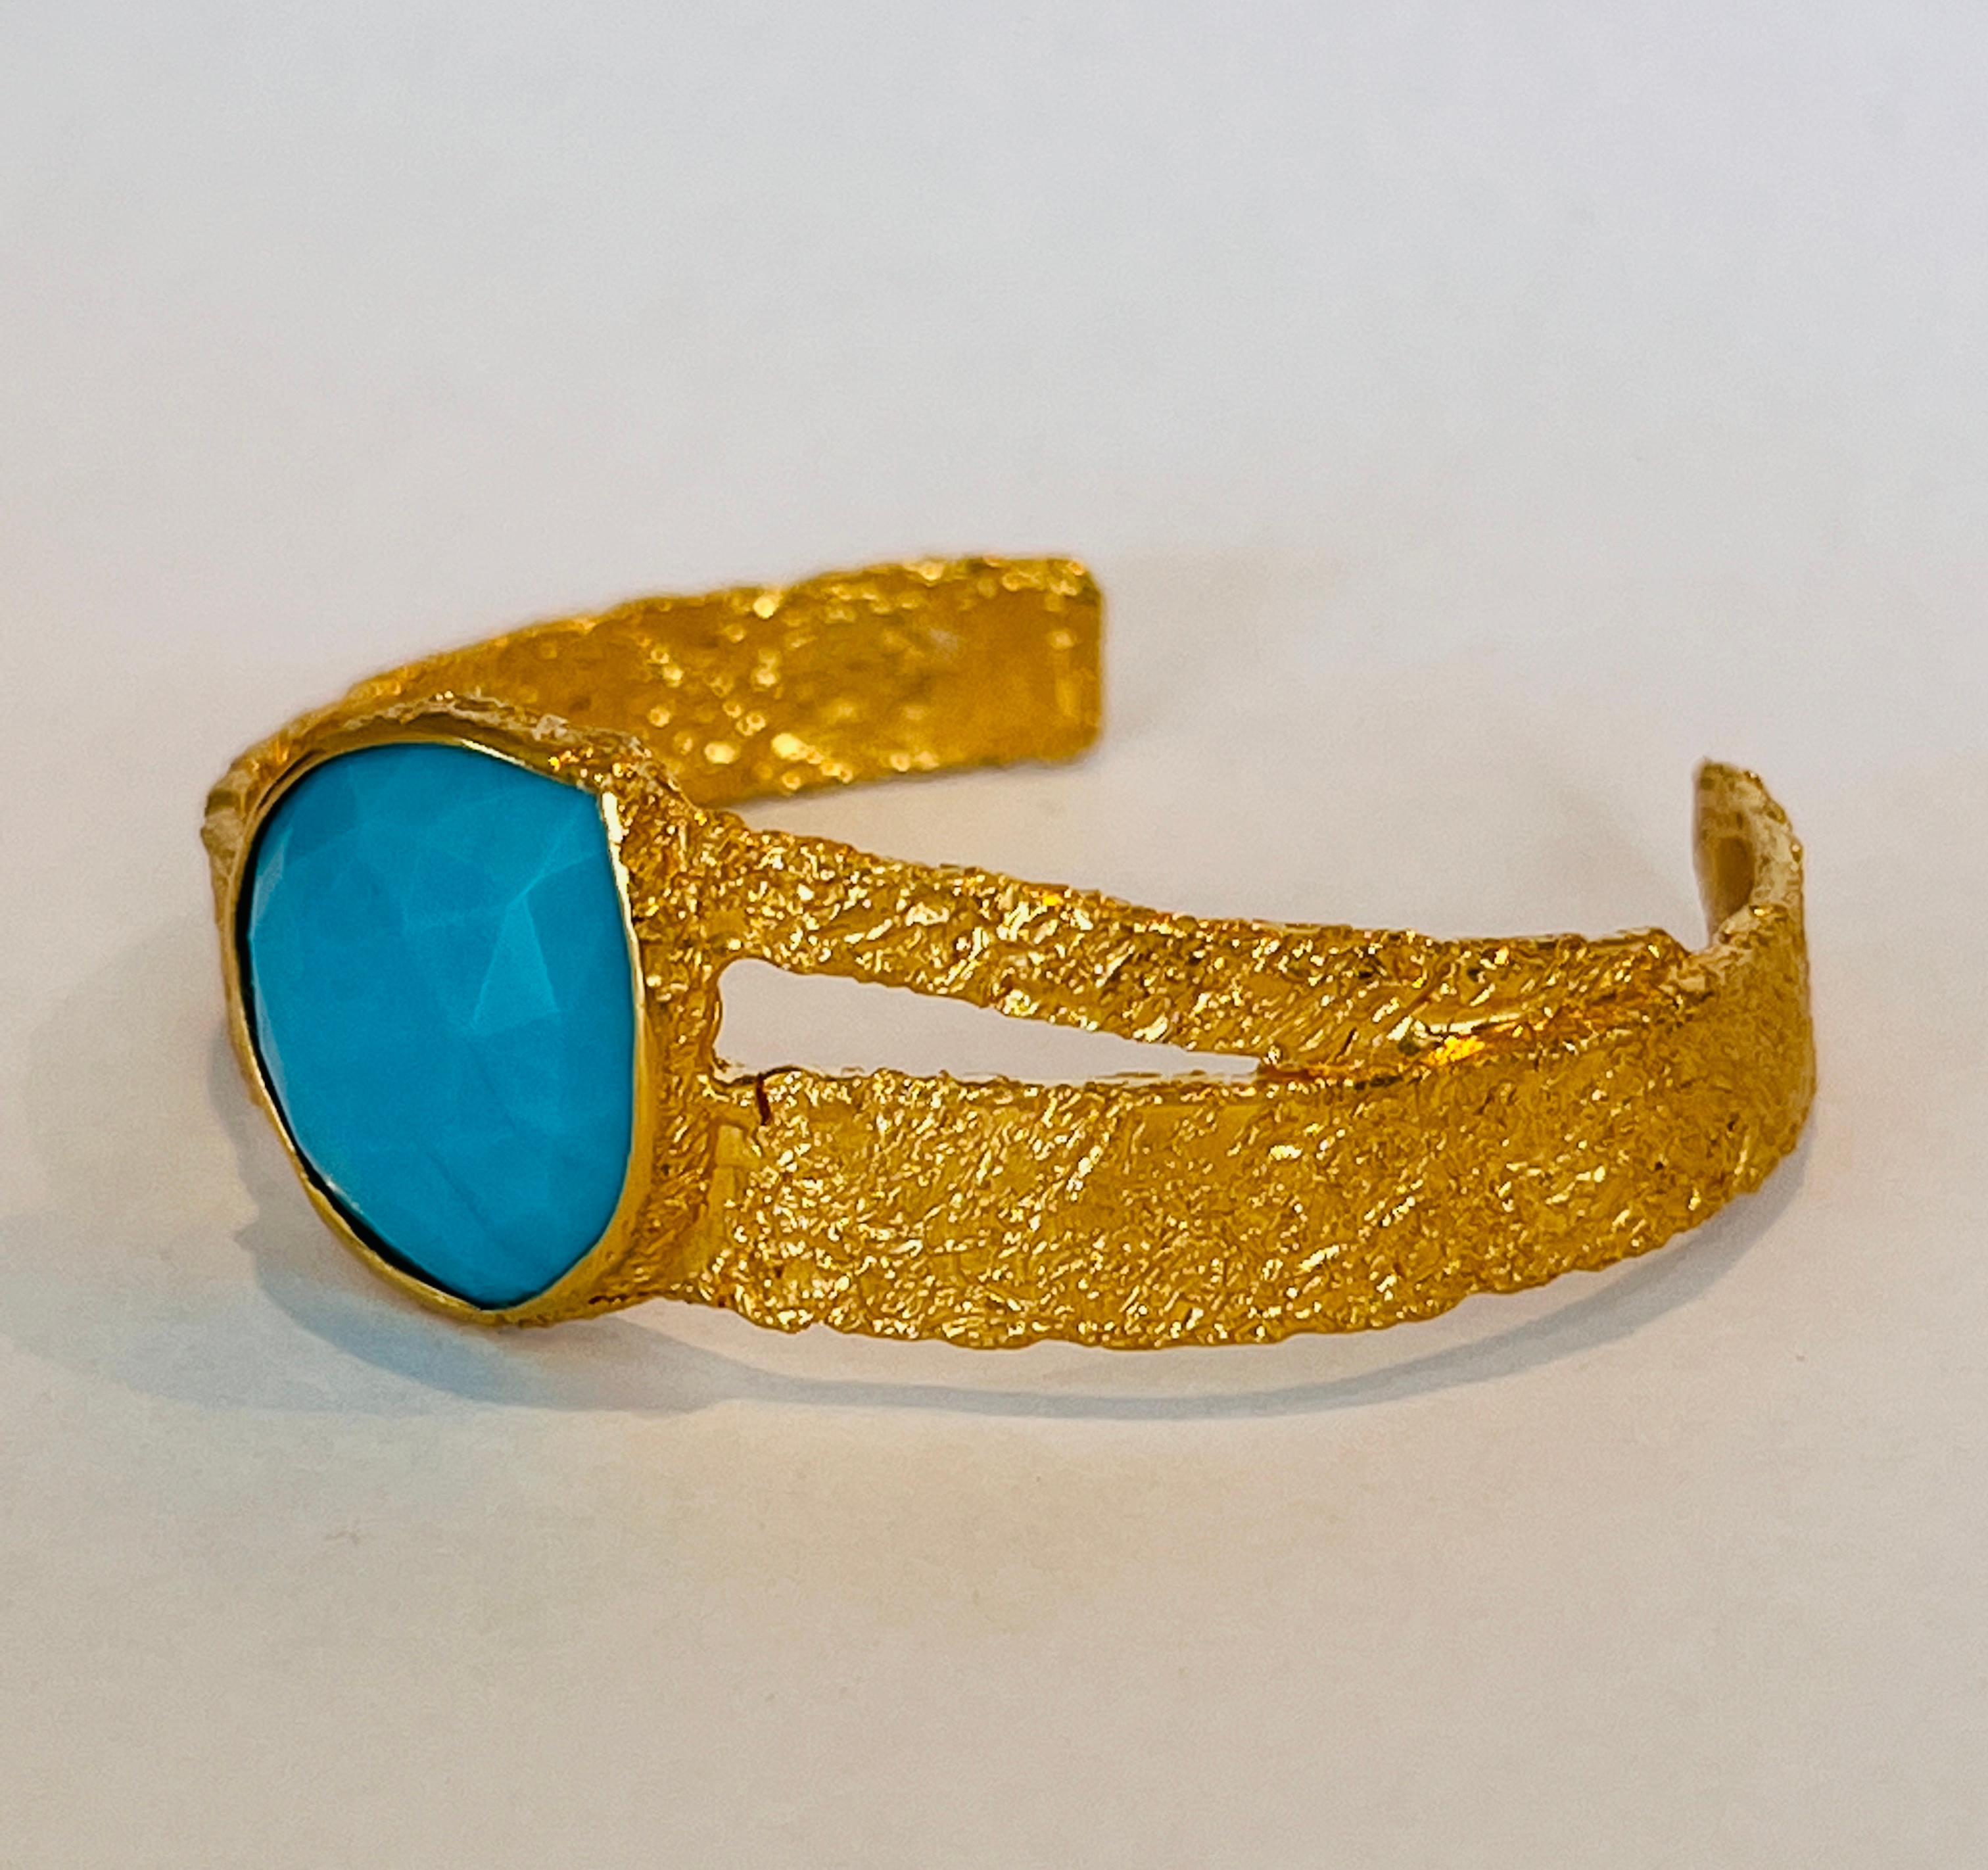 22k Gold Handmade Cuff with Turquoise, by Tagili For Sale 2